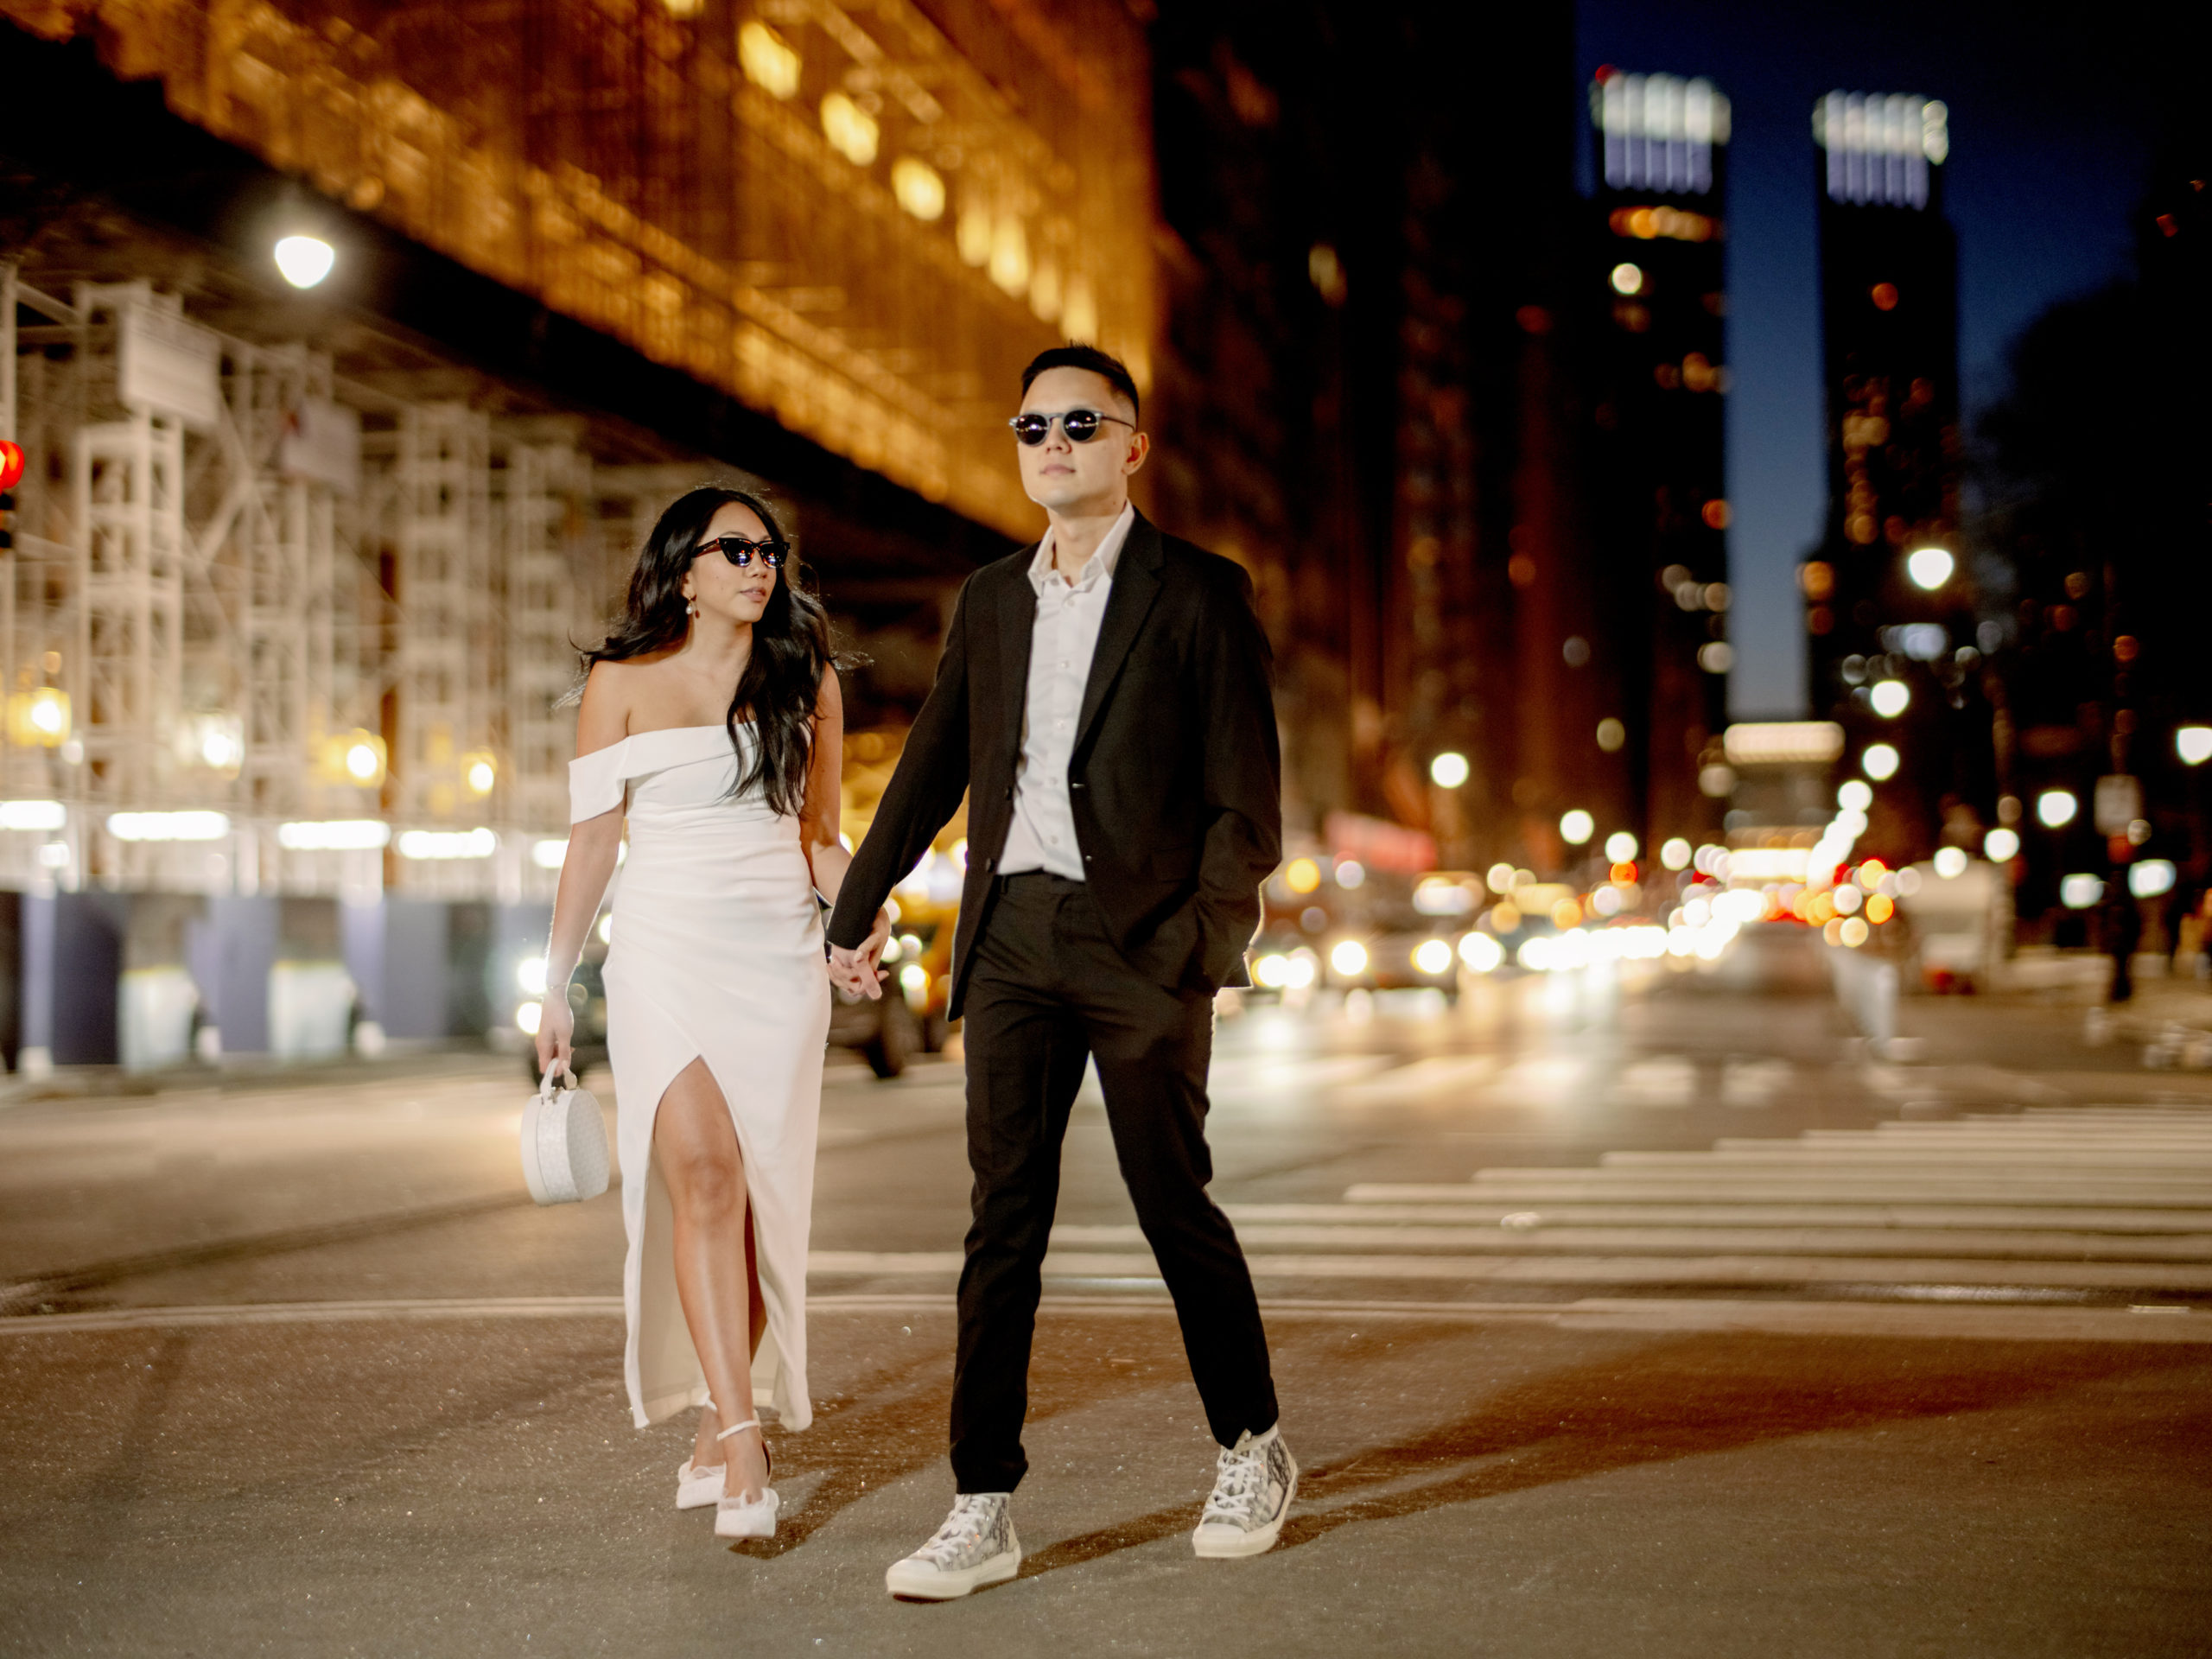 The engaged couple are wearing sunglasses in the streets of New York in the night. Photojournalistic Engagement image by Jenny Fu Studio